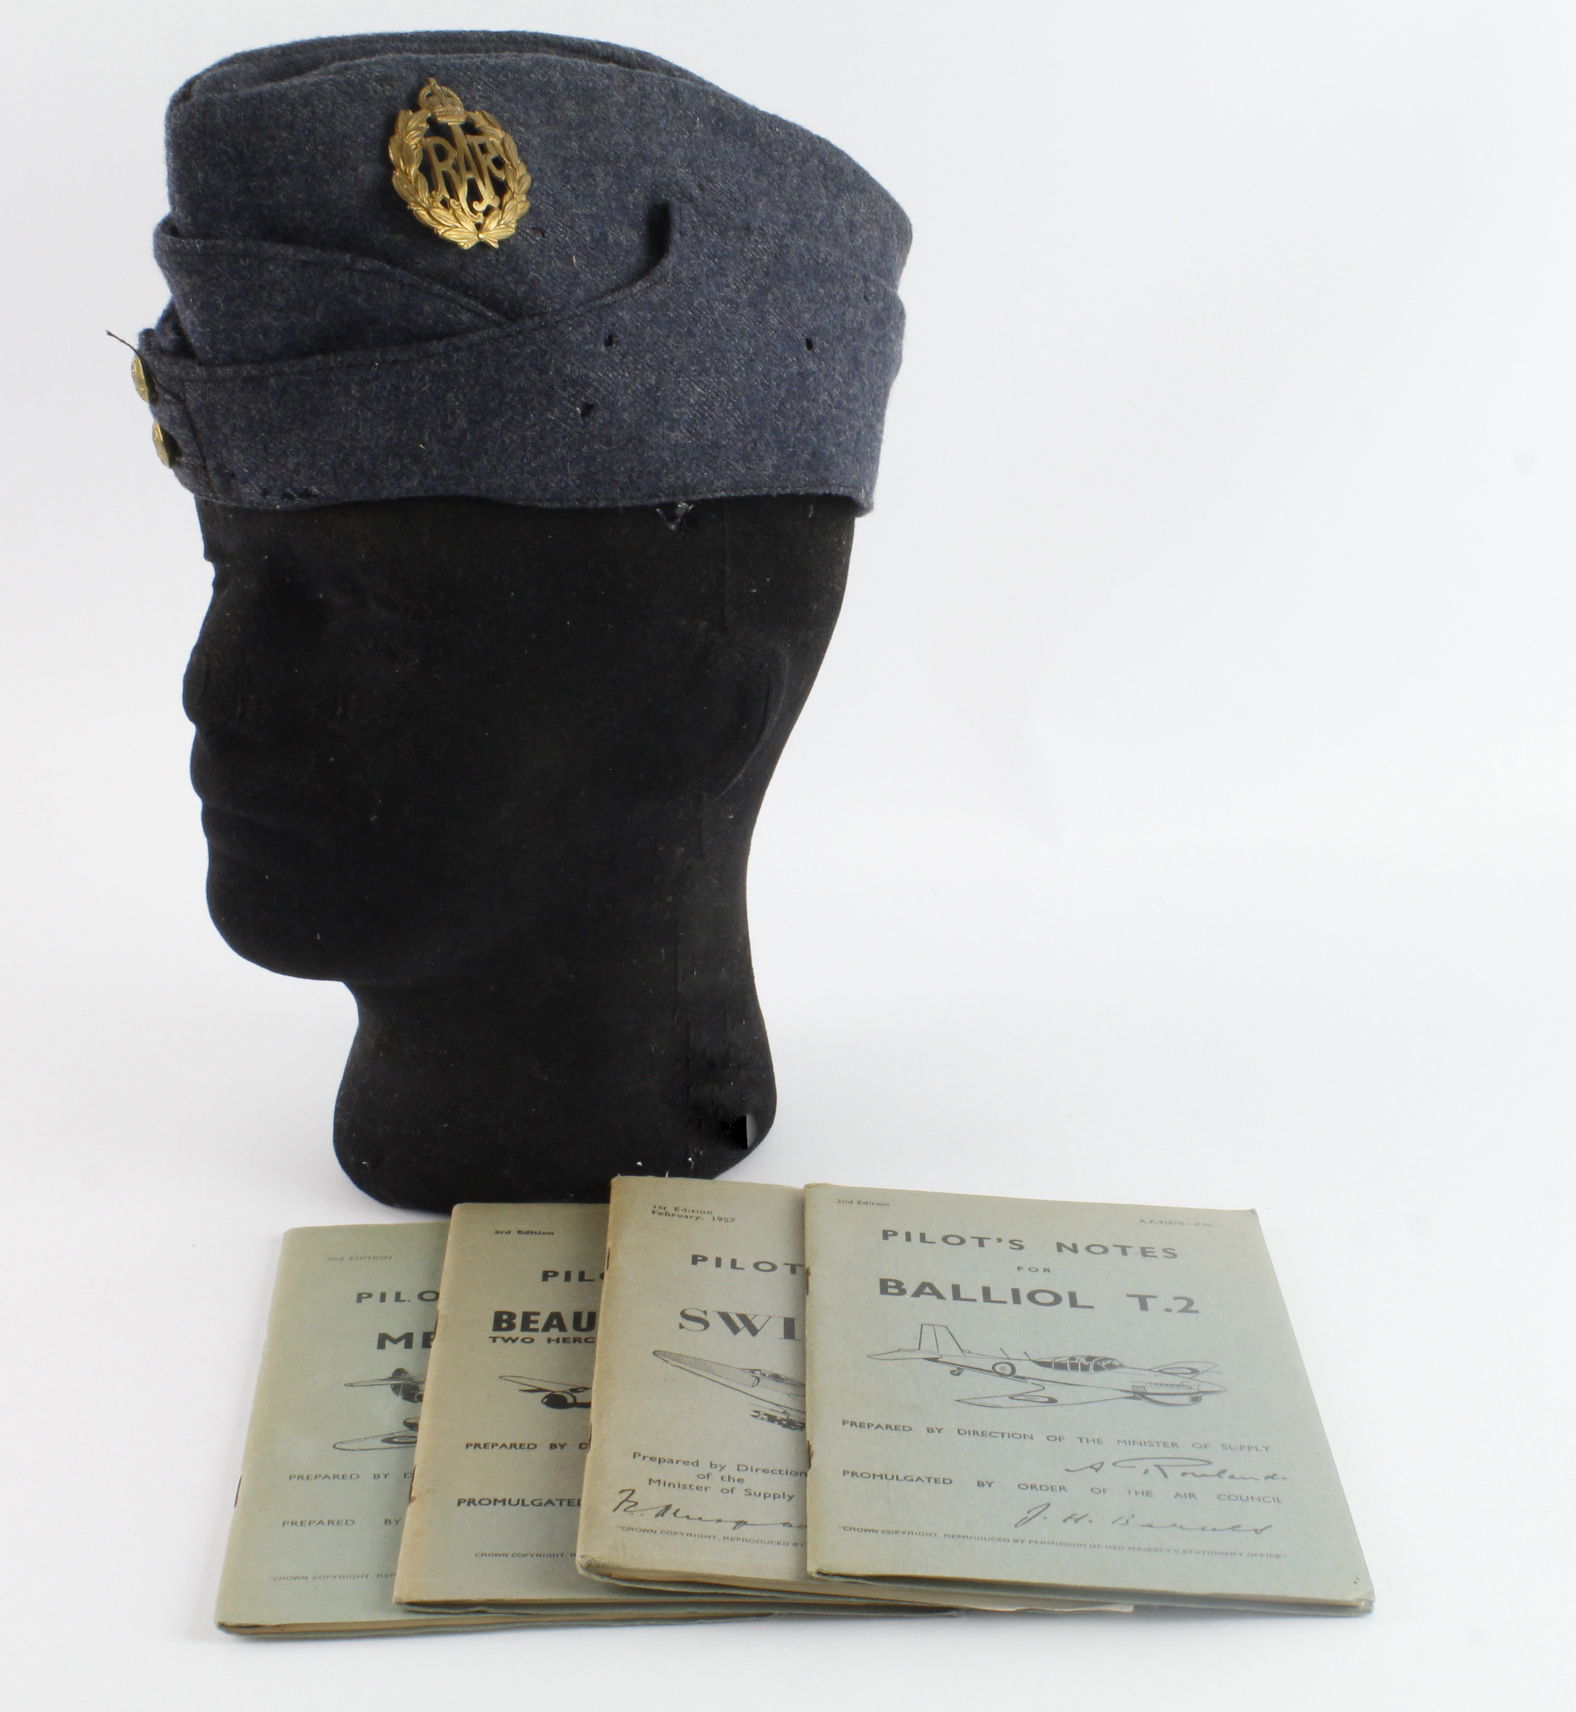 RAF airman’s side hat with pilots note books on the Swift F.7, Beaufighter TFX, Balliol T.2,